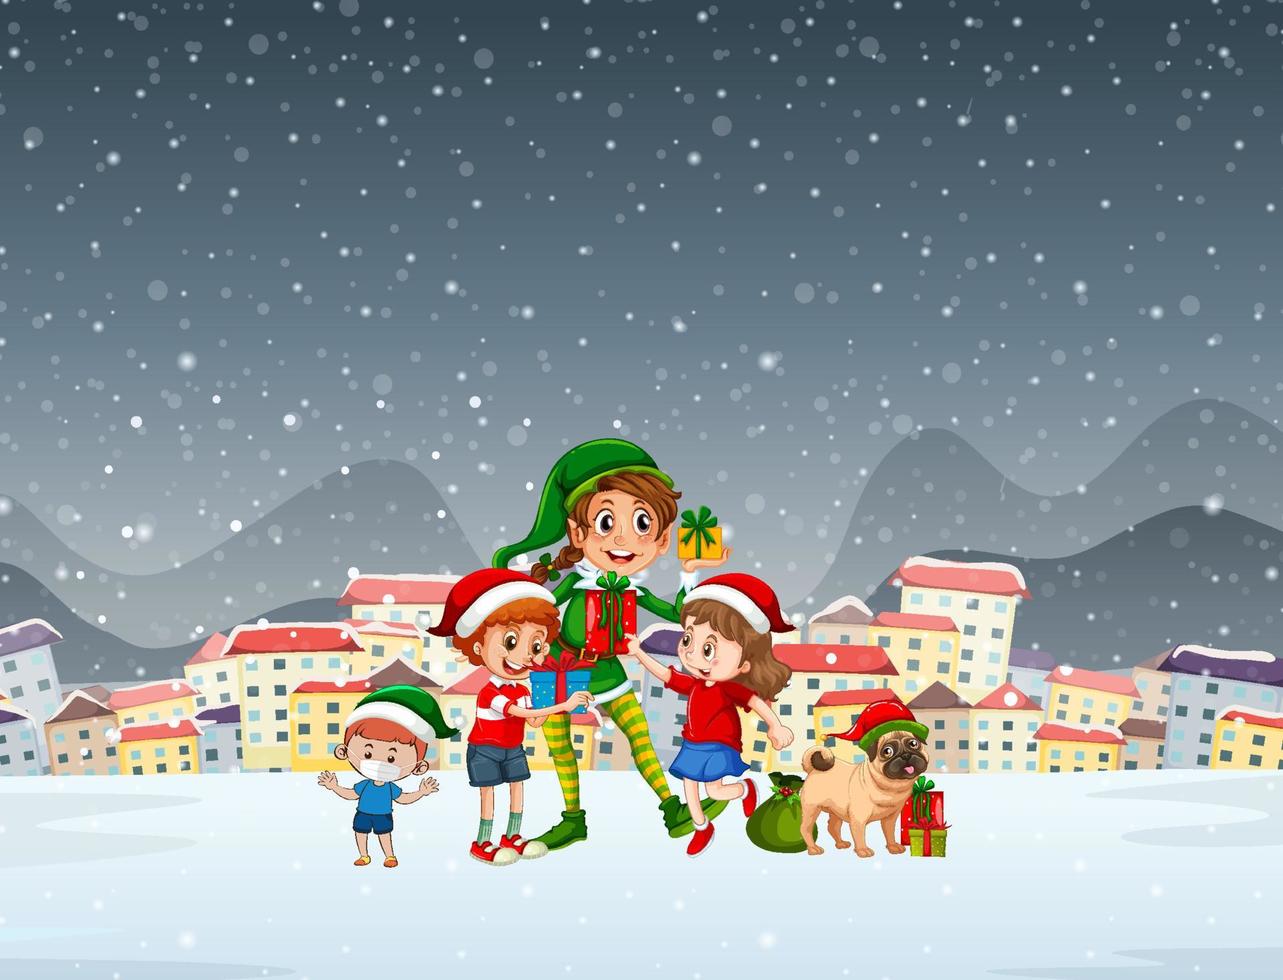 Snowy night scene with elf and dogs in cartoon style vector